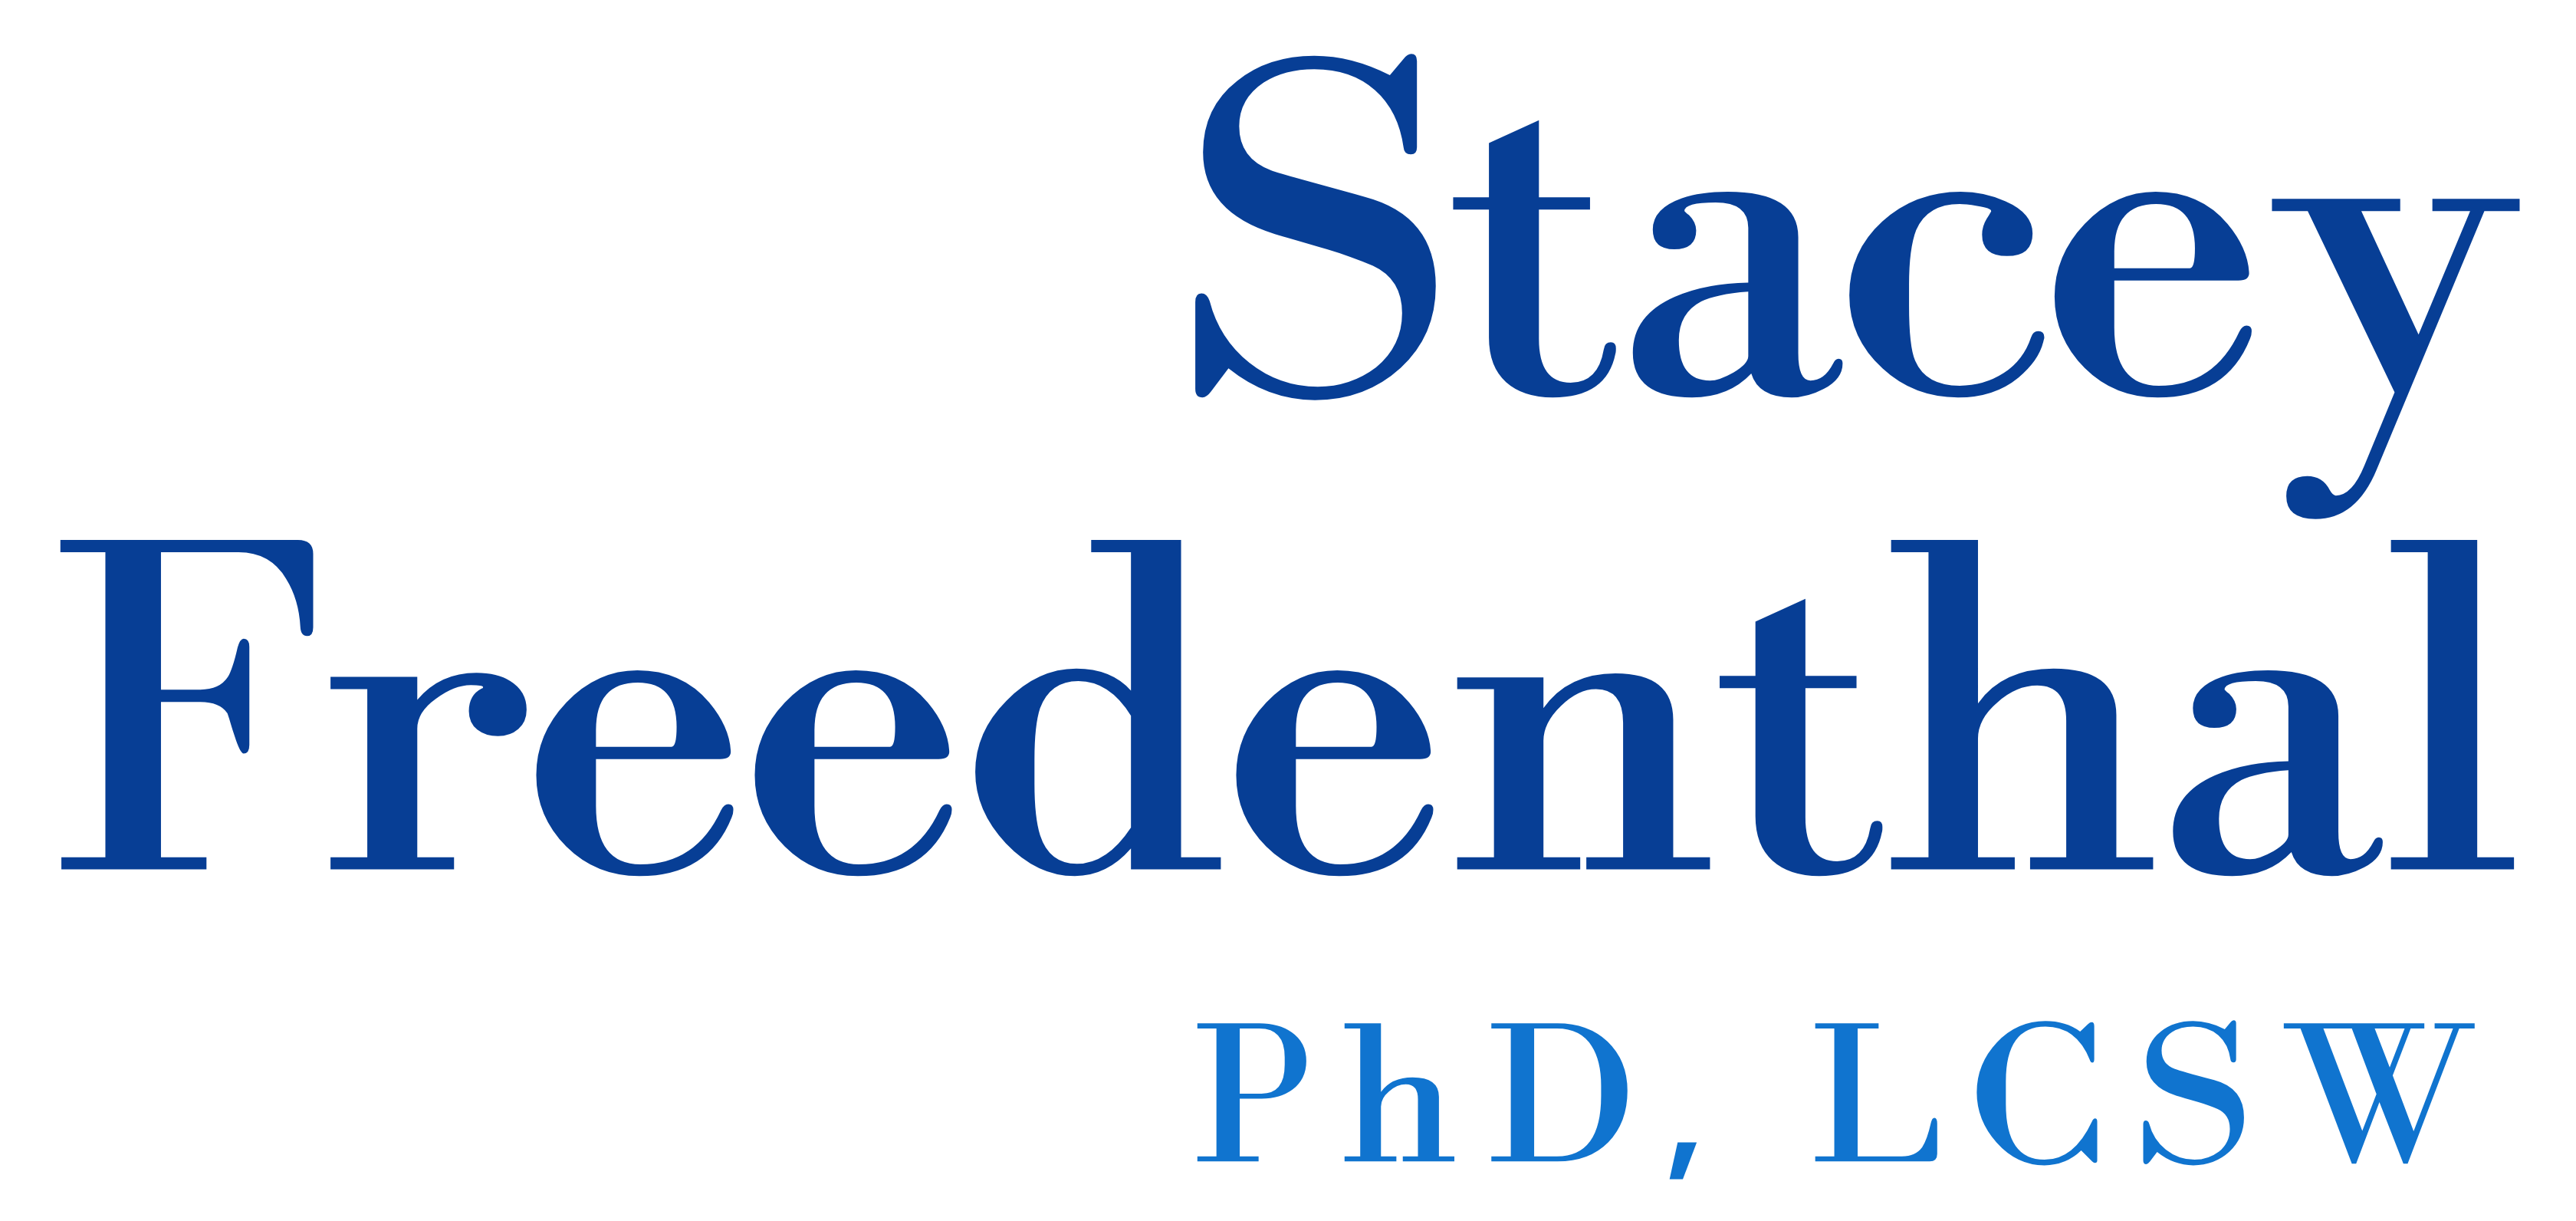 Stacey Freedenthal, PhD, LCSW